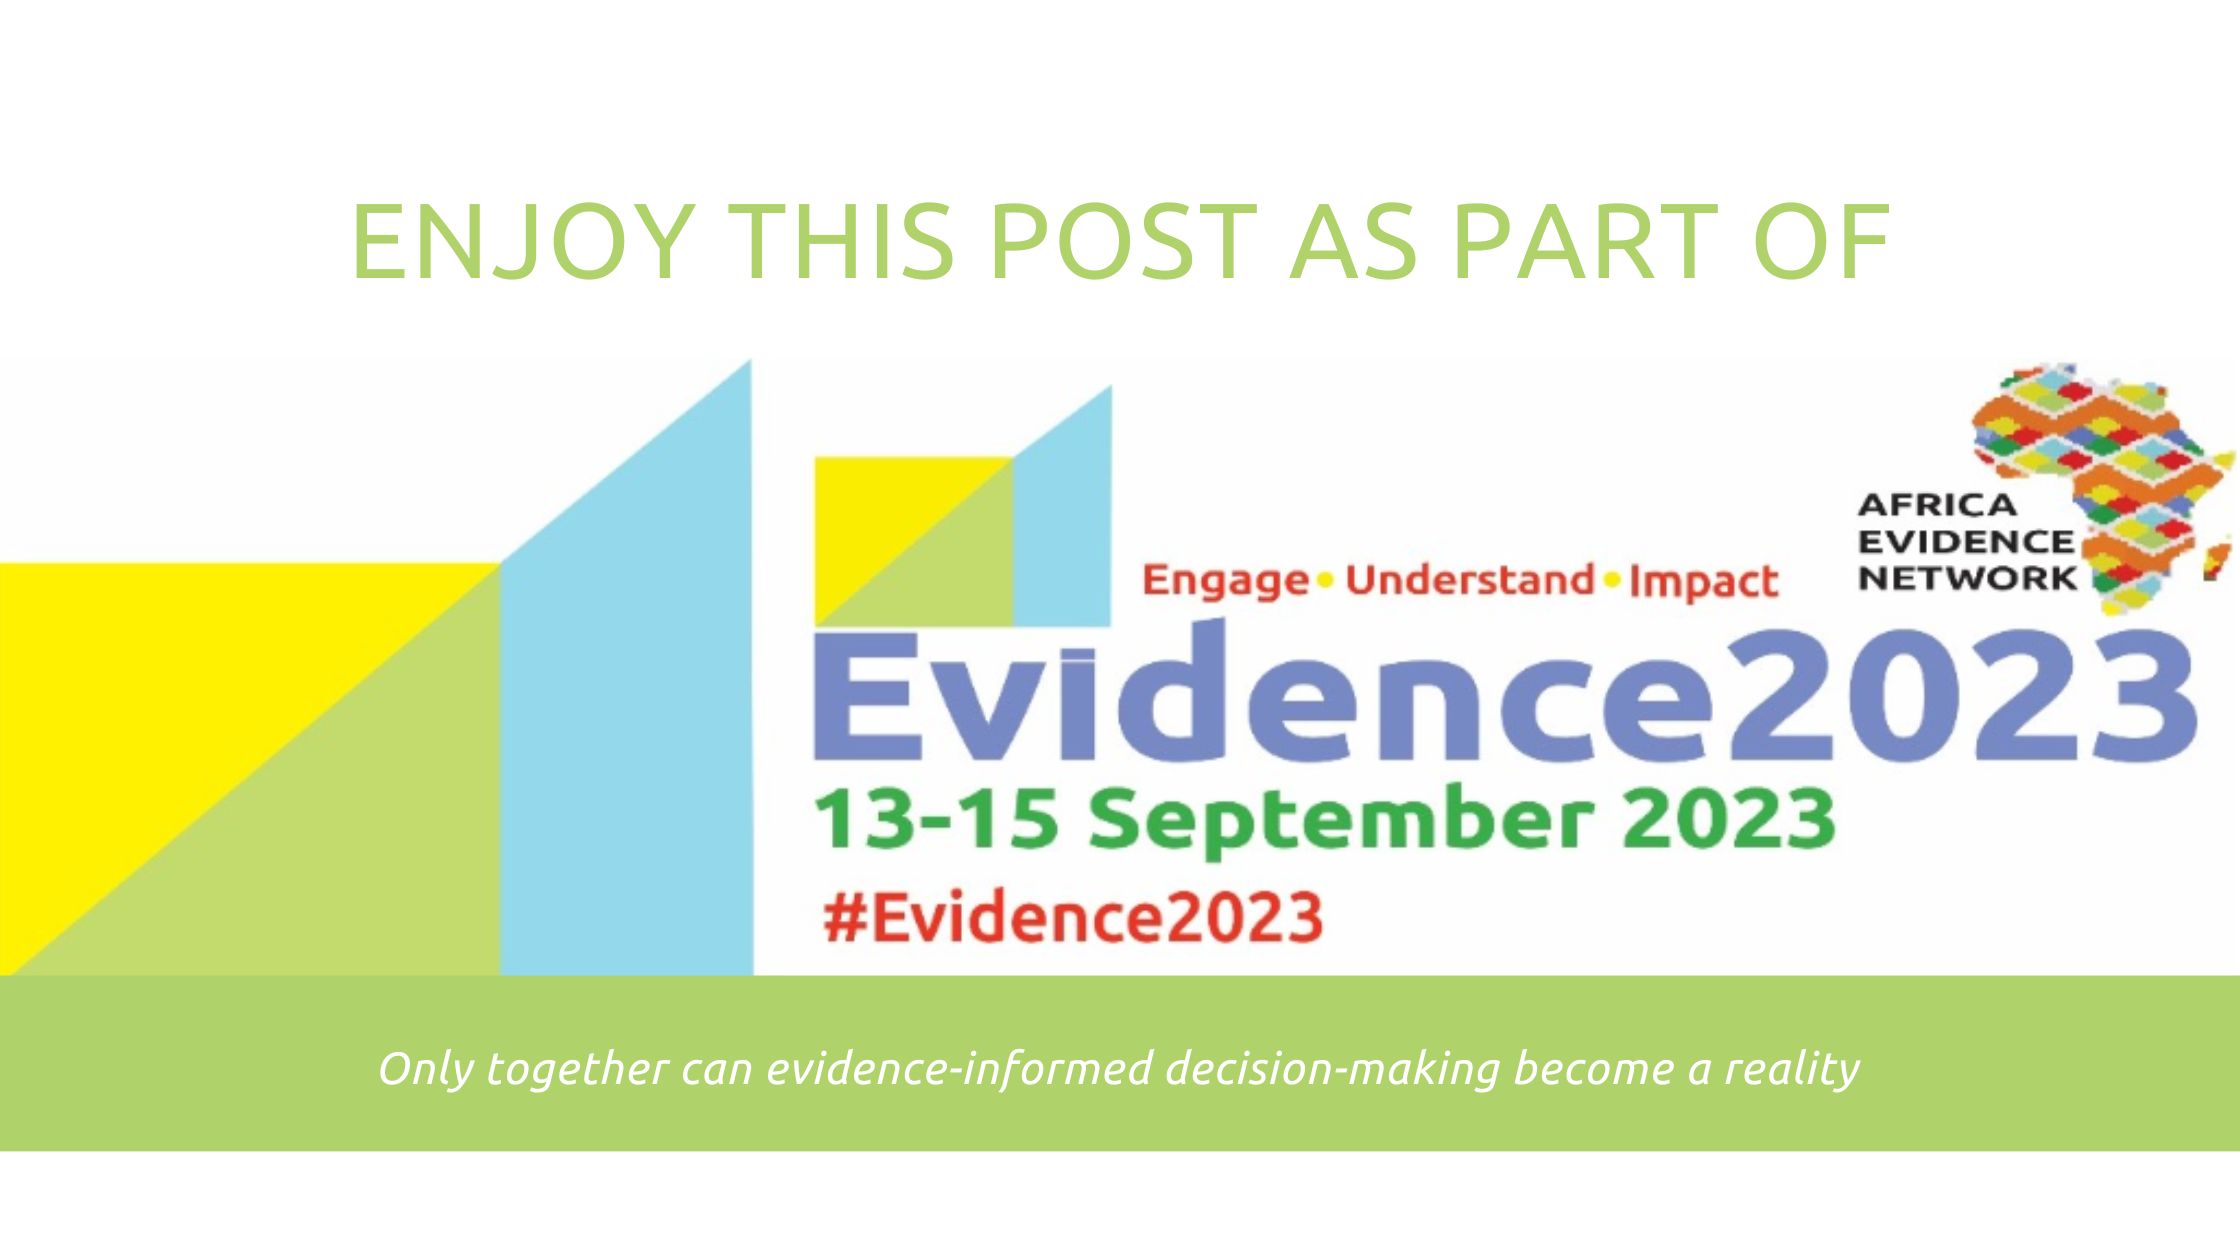 Attitudes of the education sector towards evidence use in South Africa